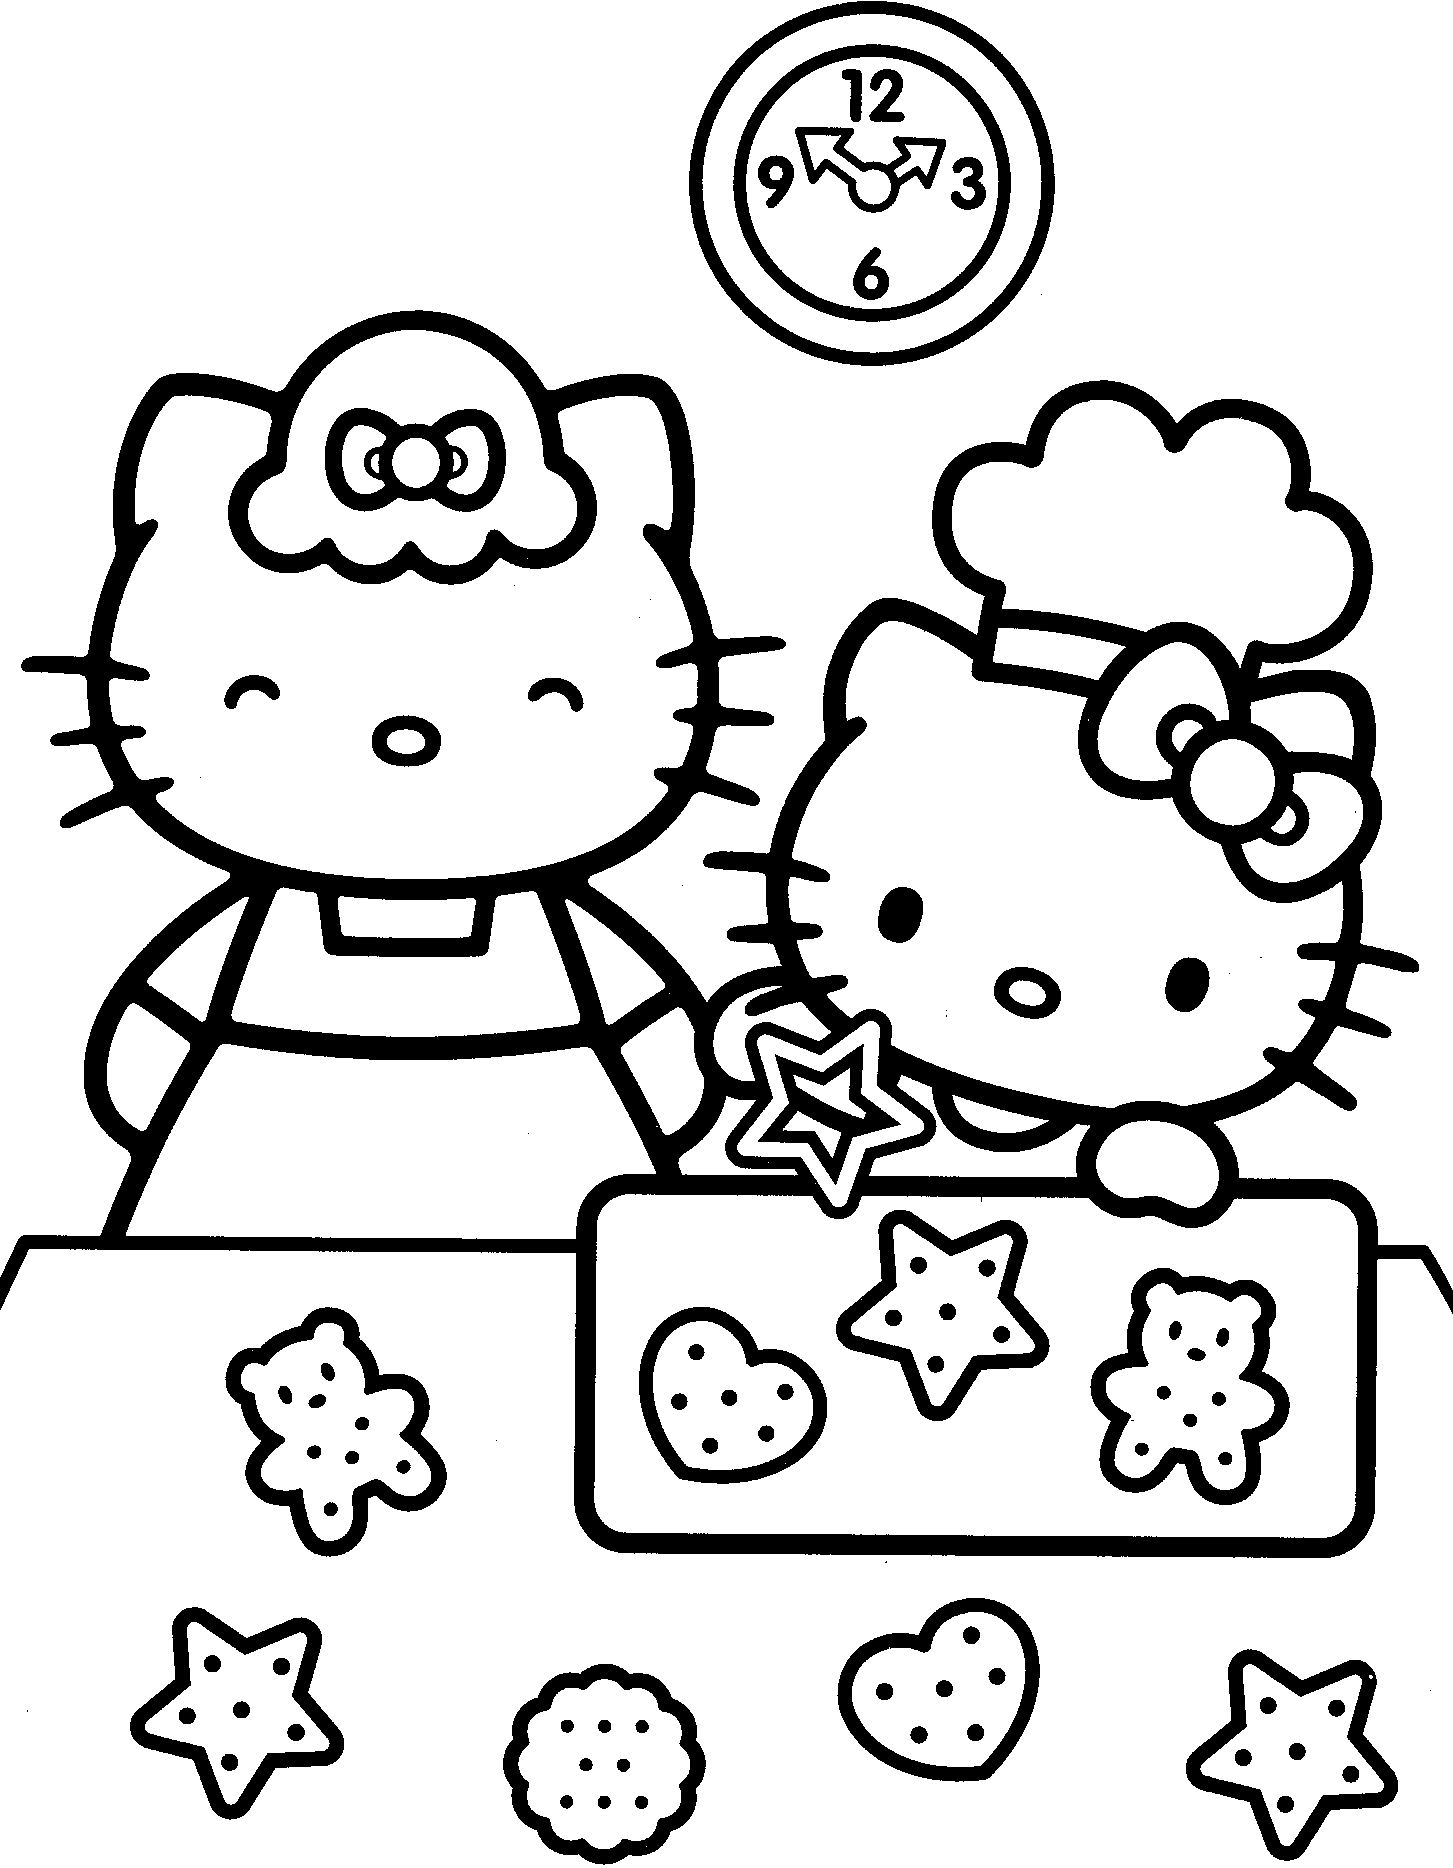 Hello Kitty - Coloring book